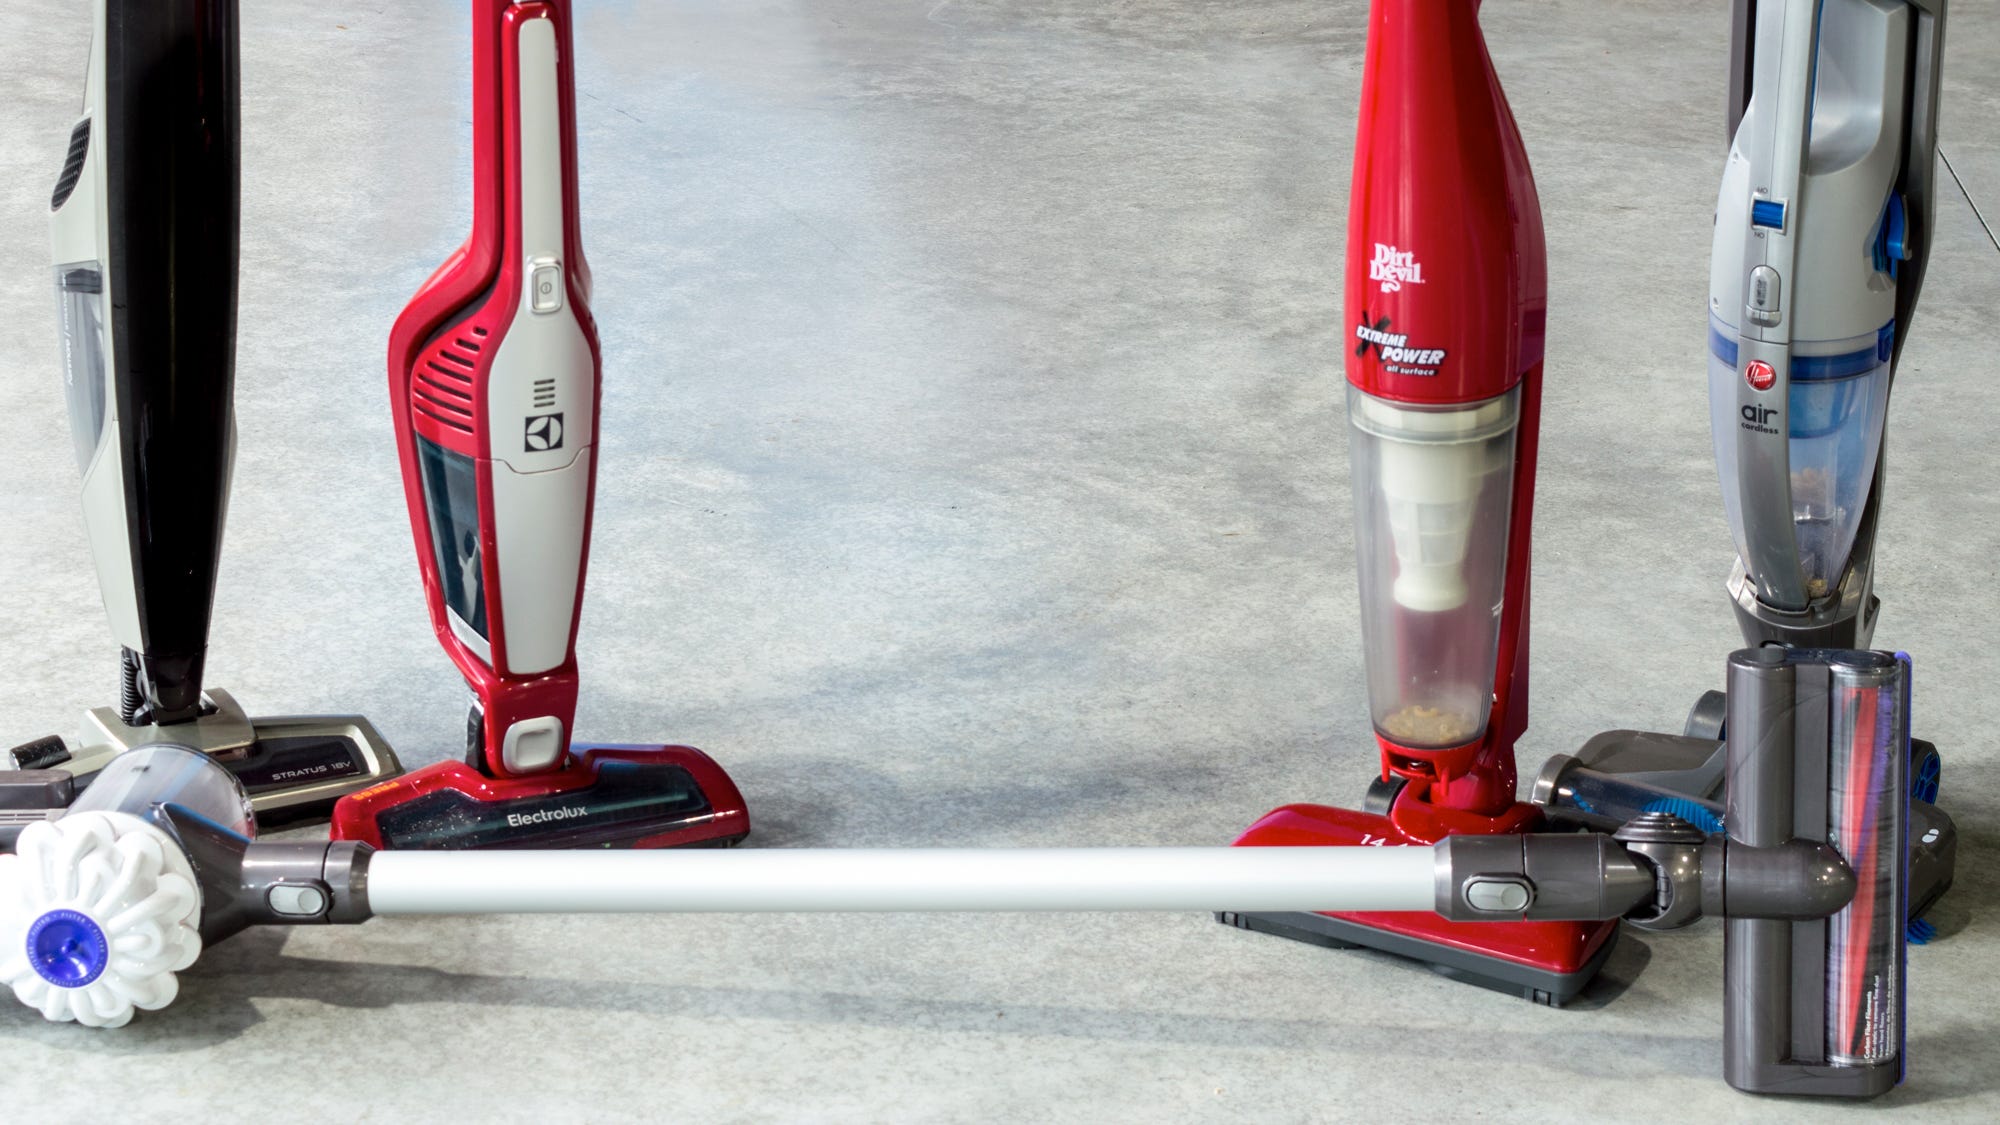 The cordless vacuums of 2020